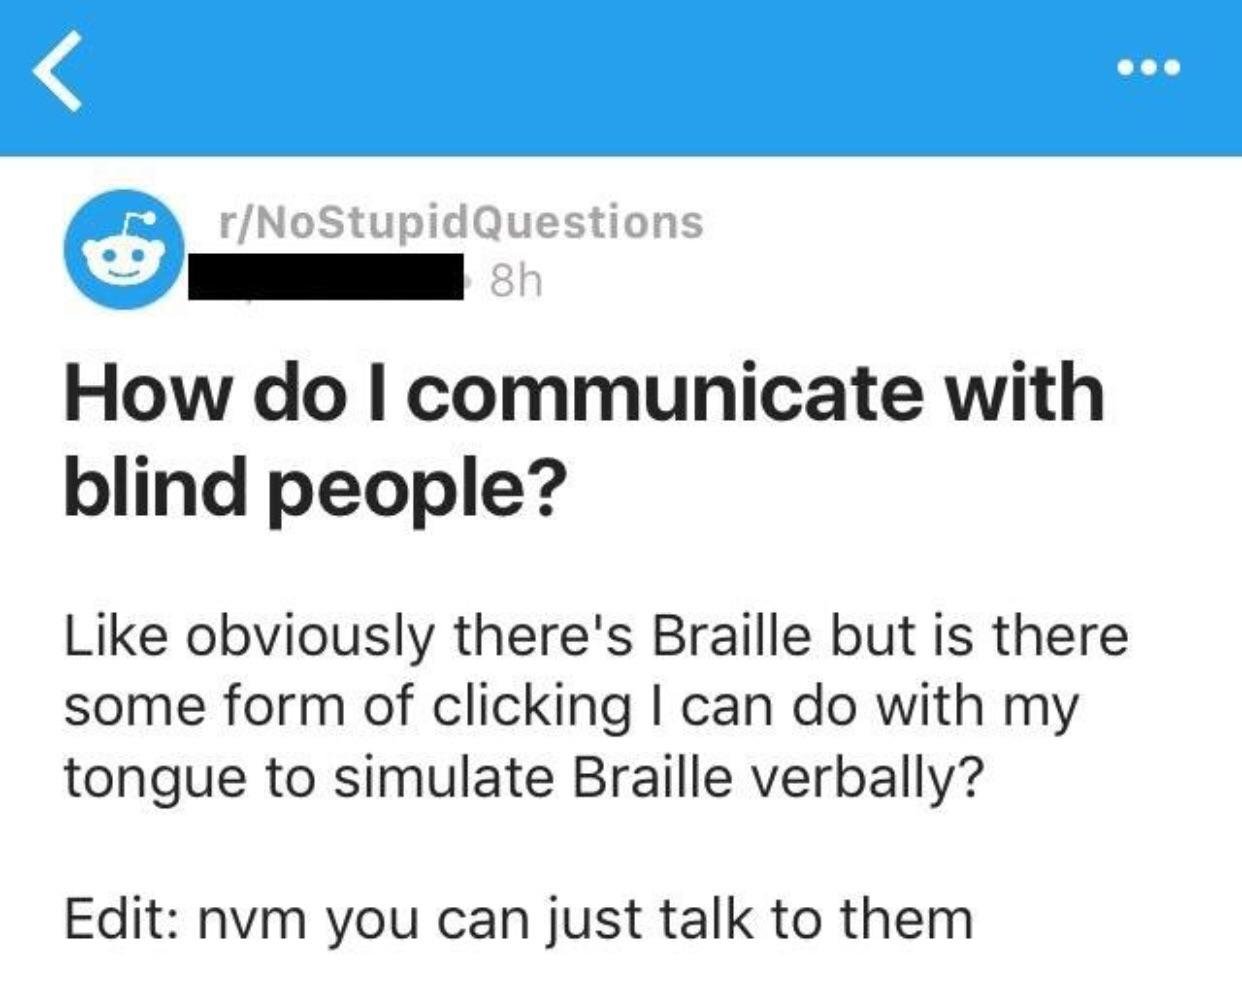 rNoStupid Questions 8h How do I communicate with blind people? obviously there's Braille but is there some form of clicking I can do with my tongue to simulate Braille verbally? Edit nvm you can just talk to them